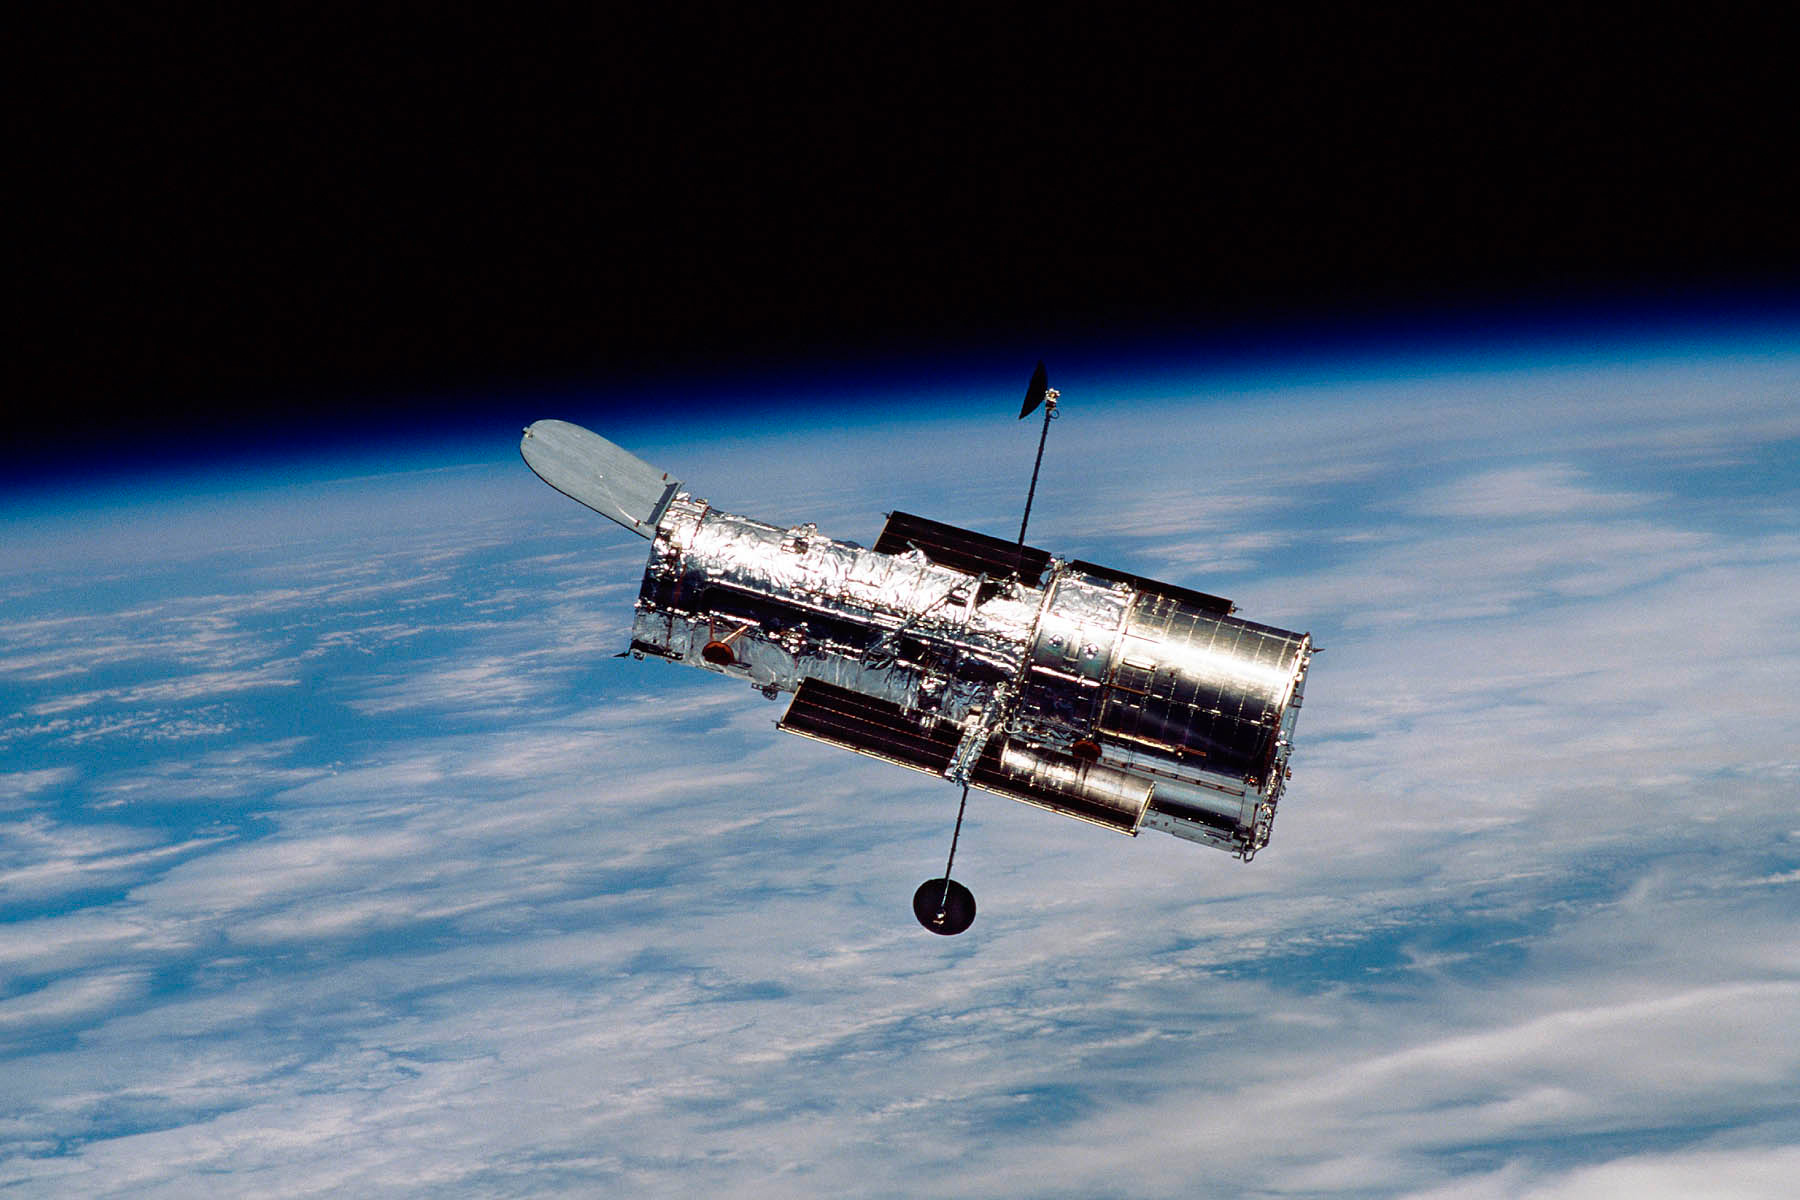 The Hubble Space Telescope flying in low-Earth orbit, with the blue planet visible beneath it.